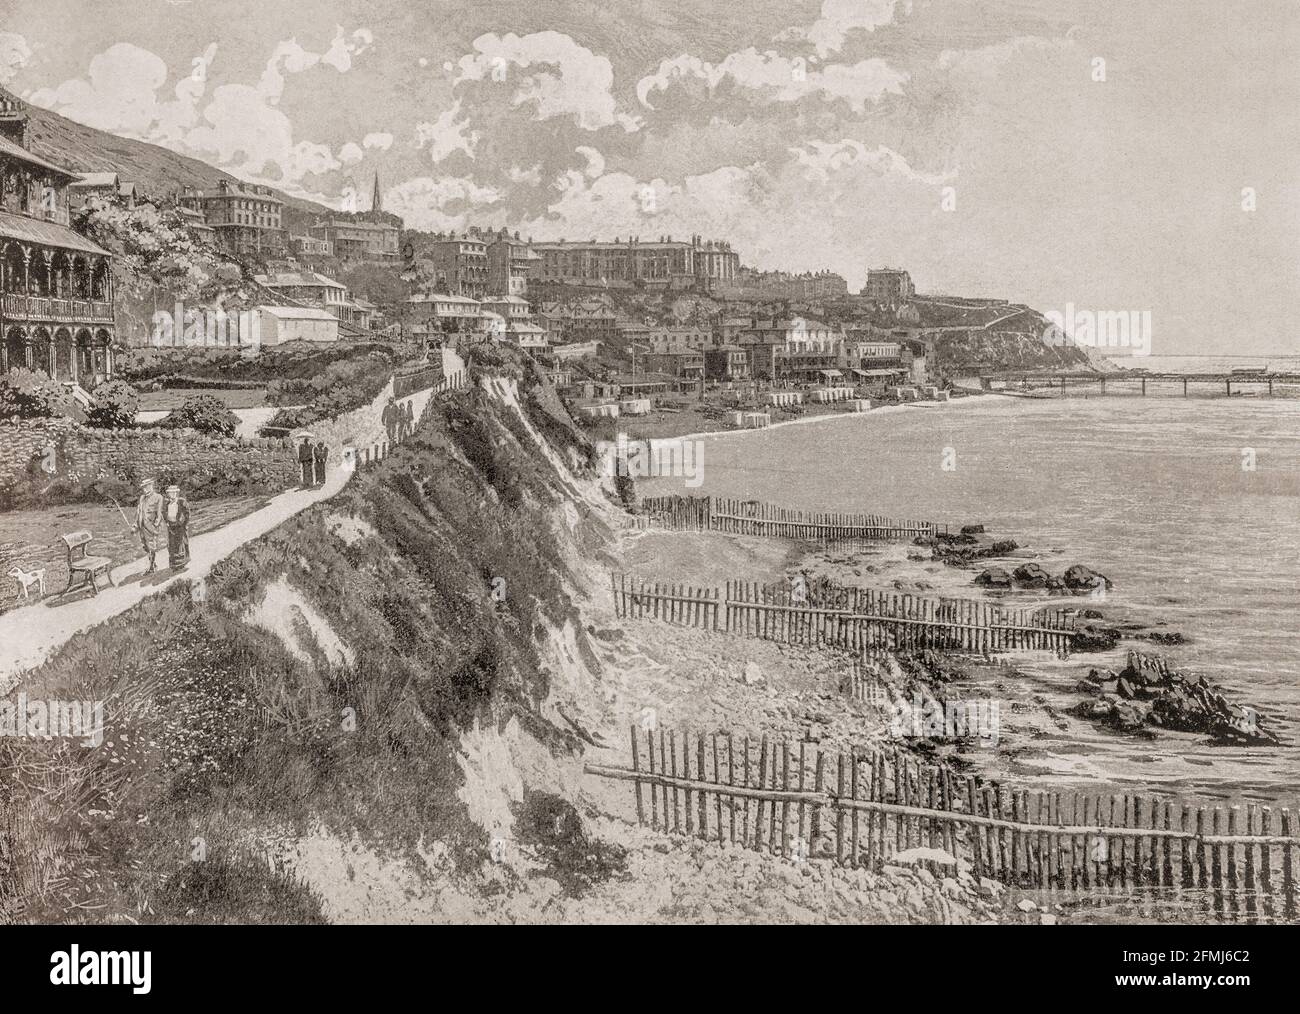 A late 19th Century view of Ventnor, a seaside resort and civil parish established in the Victorian era on the southeast coast of the Isle of Wight, England. Situated on steep slopes leading down to the sea. Ventnor became extremely fashionable as both a health and holiday resort in the late 19th century, described as the 'English Mediterranean' and 'Mayfair by the Sea'. Stock Photo